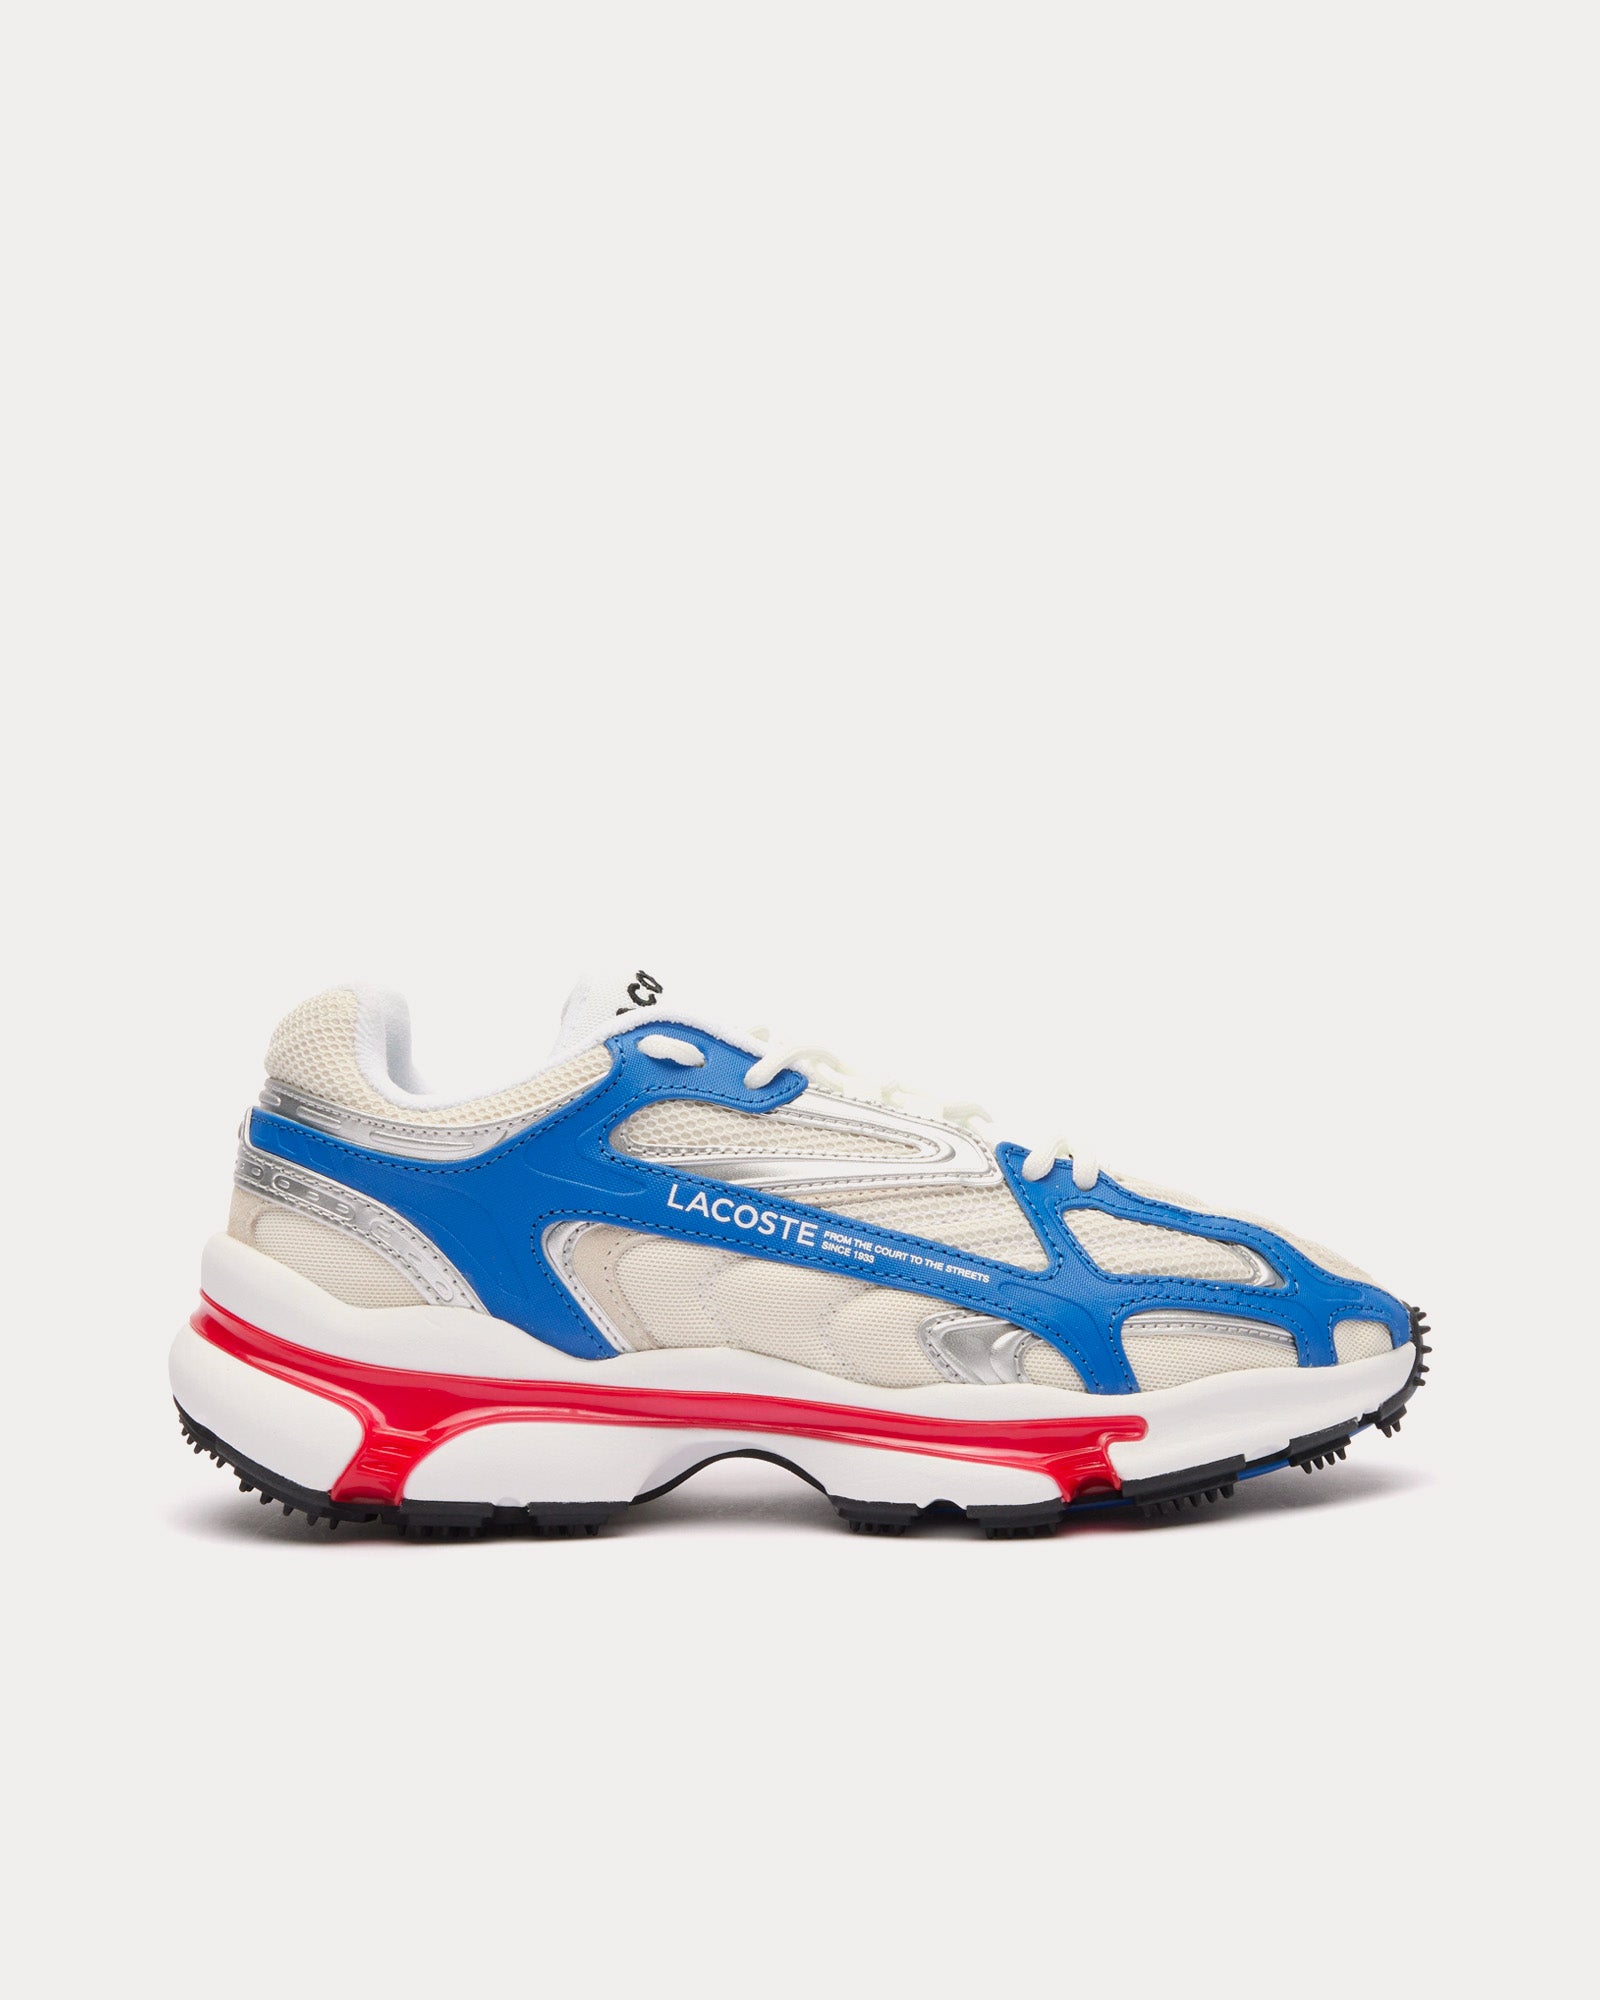 Lacoste - L003 2K24 White / Red / Blue Low Top Sneakers